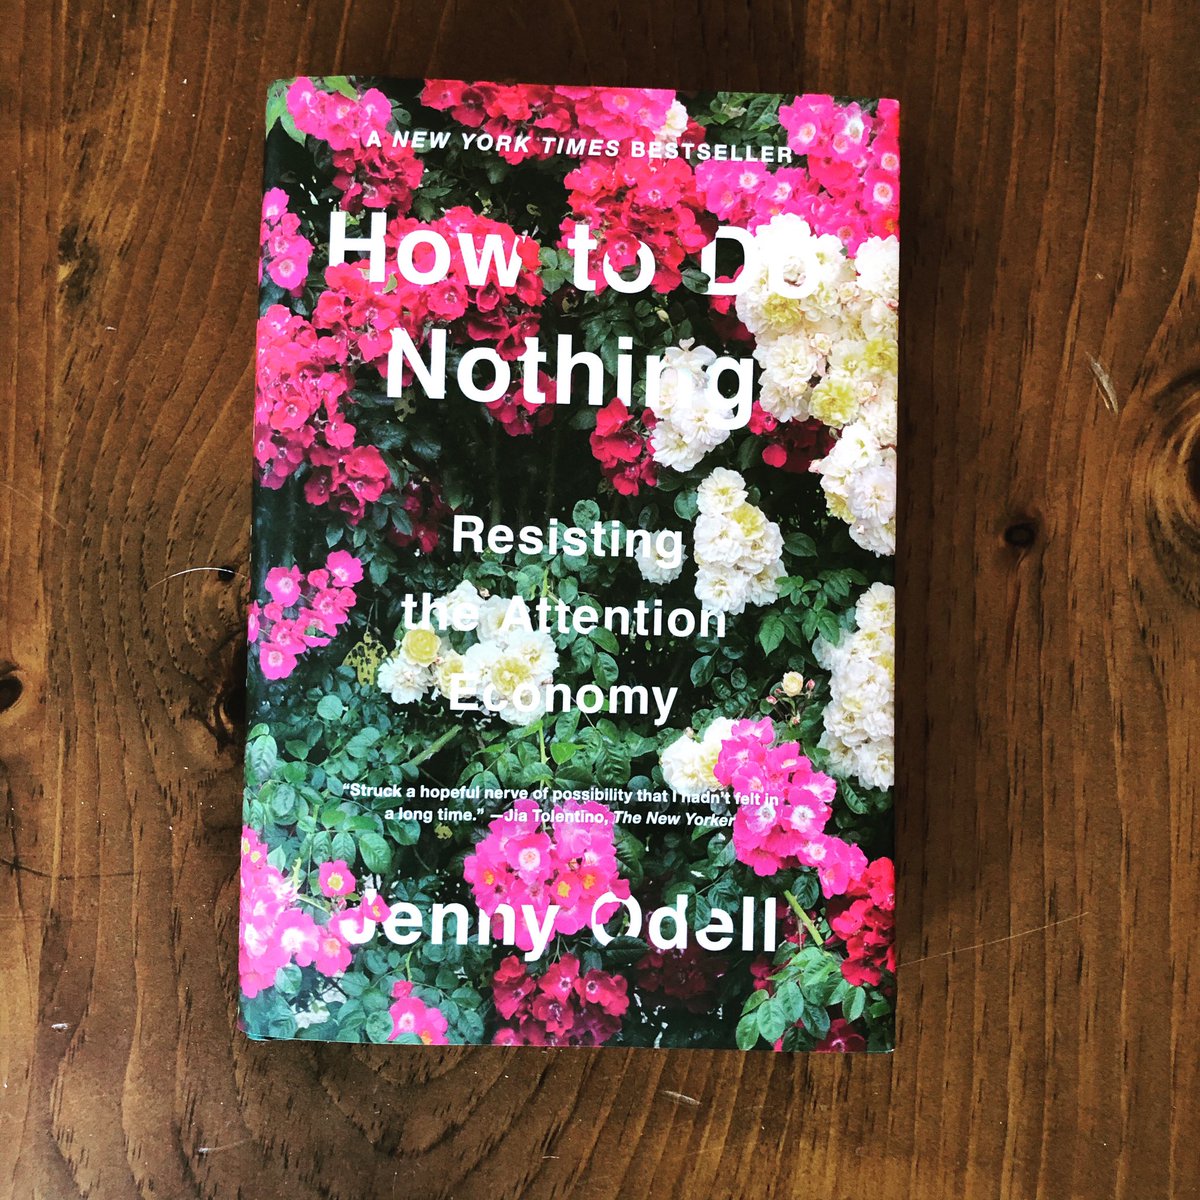 35/52How To Do Nothing: Resisting the Attention Economy by Jenny Odell. I cannot recommend this enough, and no, it’s not a social media bashing screed. It’s thoughtful, researched, and nuanced and now is the perfect time to read it.  #52booksin52weeks  #2020books  #booksof2020